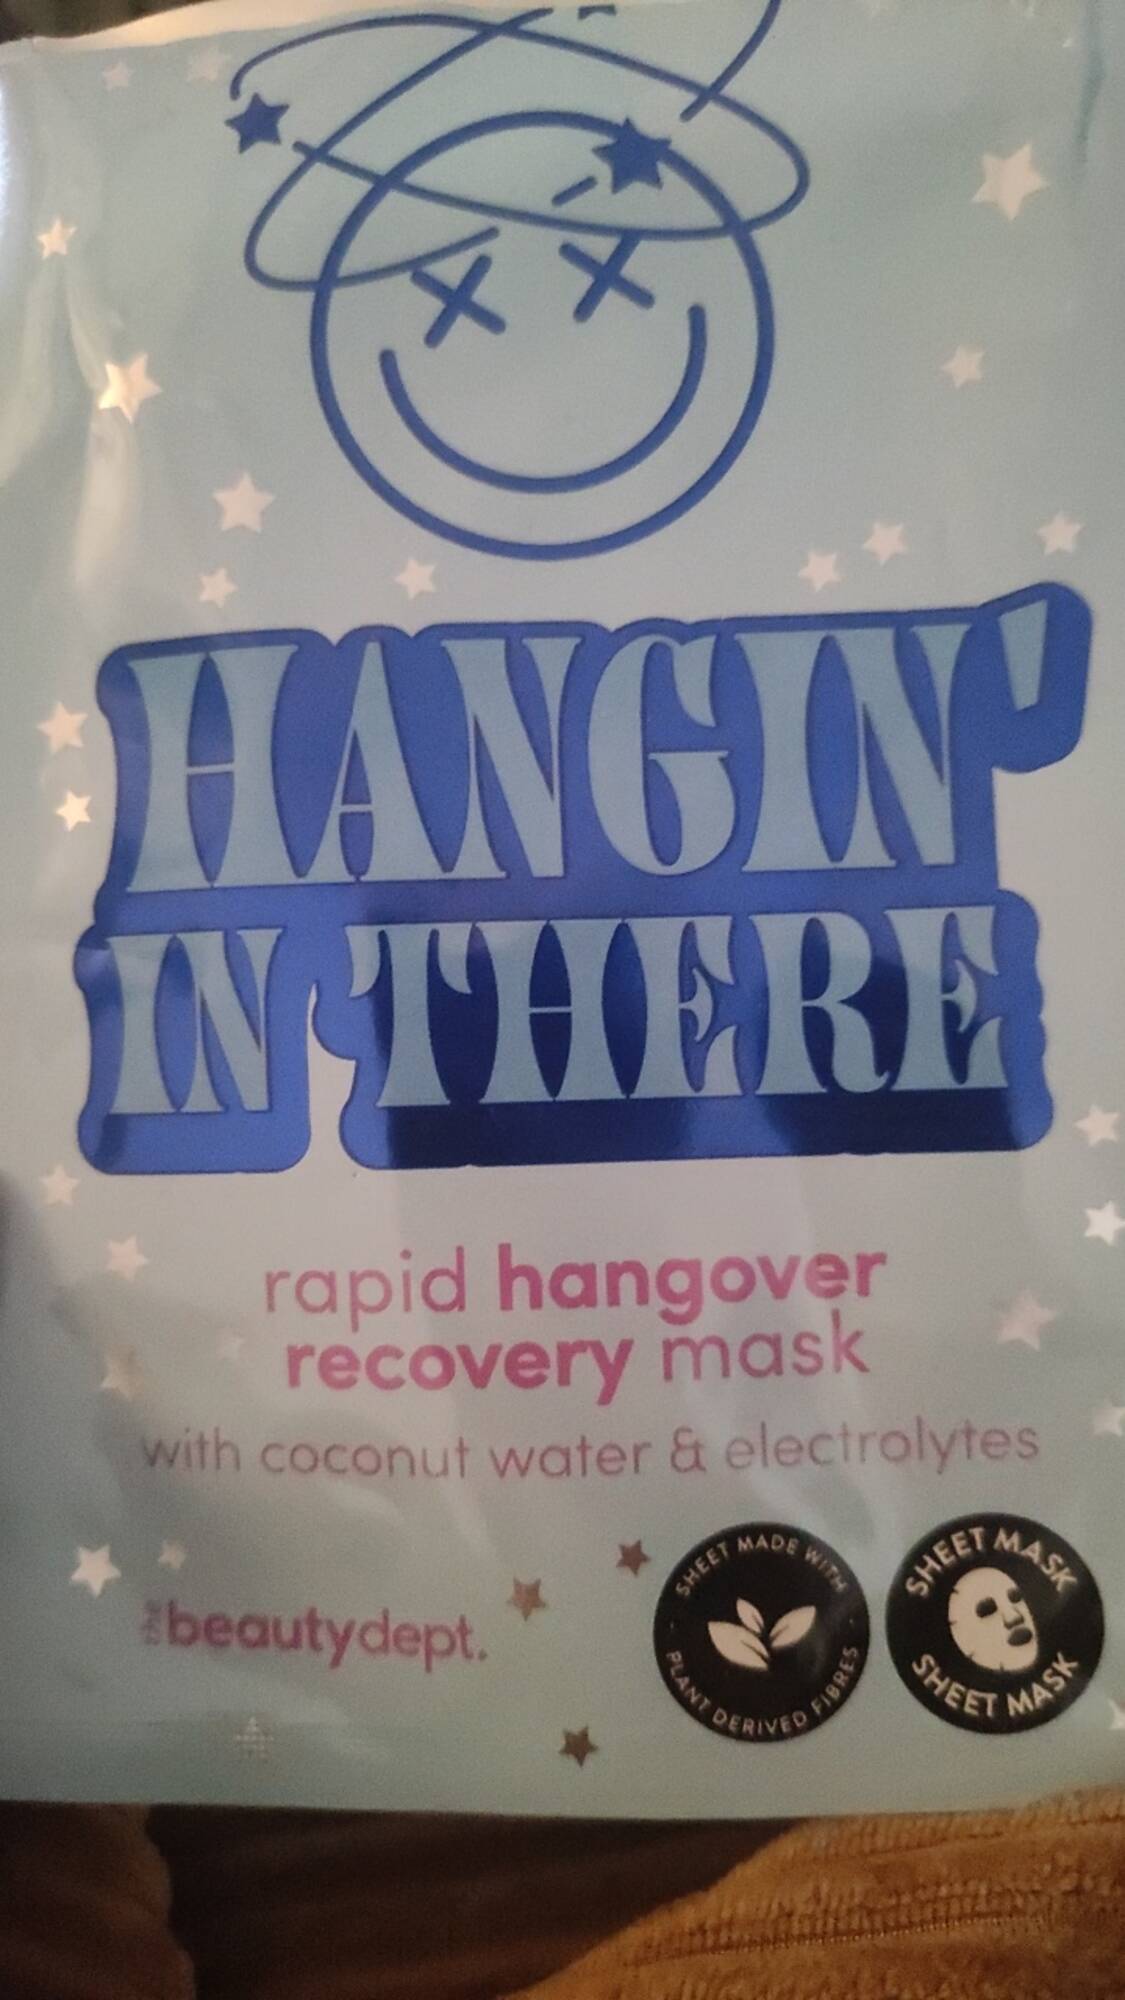 THE BEAUTY DEPT - Hangin' in there - Rapid hangover recovery mask